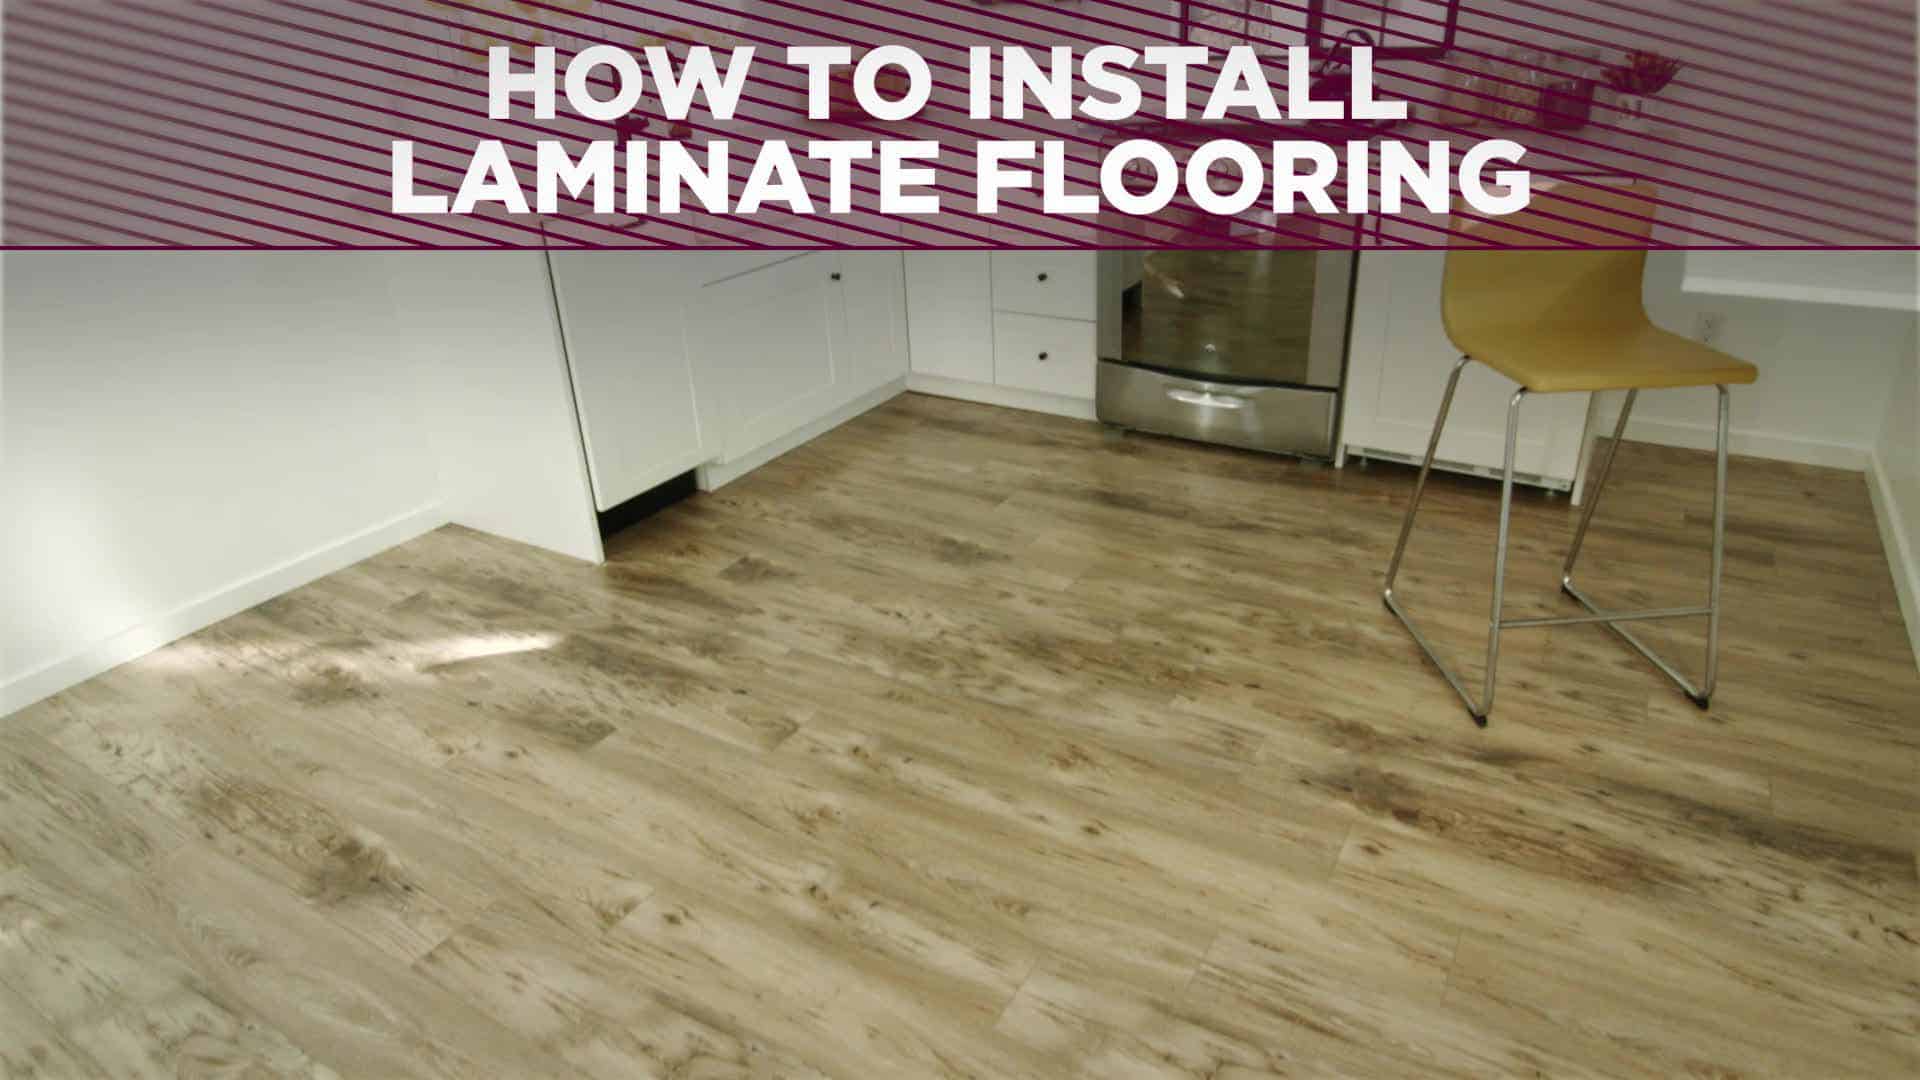 How to Lay Laminate Wood Flooring? The Housing Forum